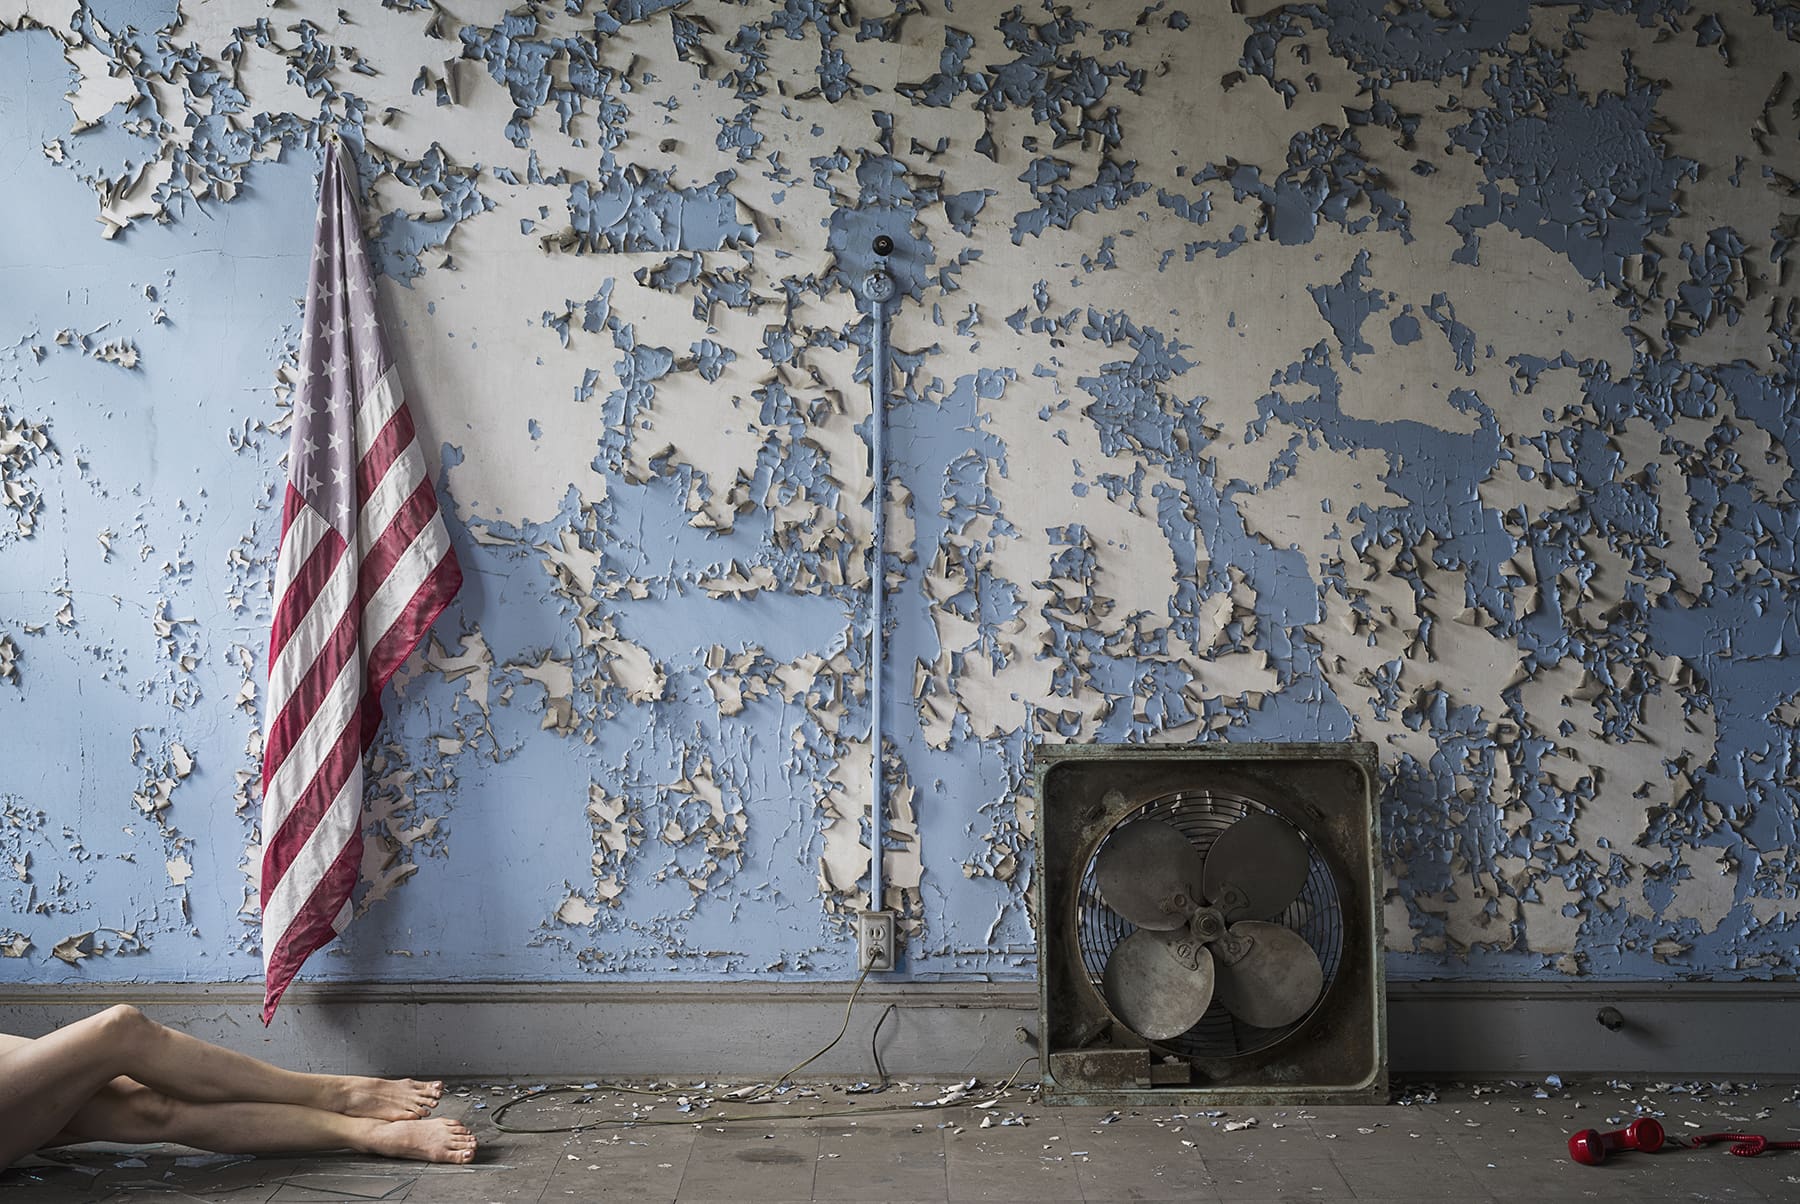 A wall with peeling blue paint, an American flag, a red phone and a women's pair of legs.